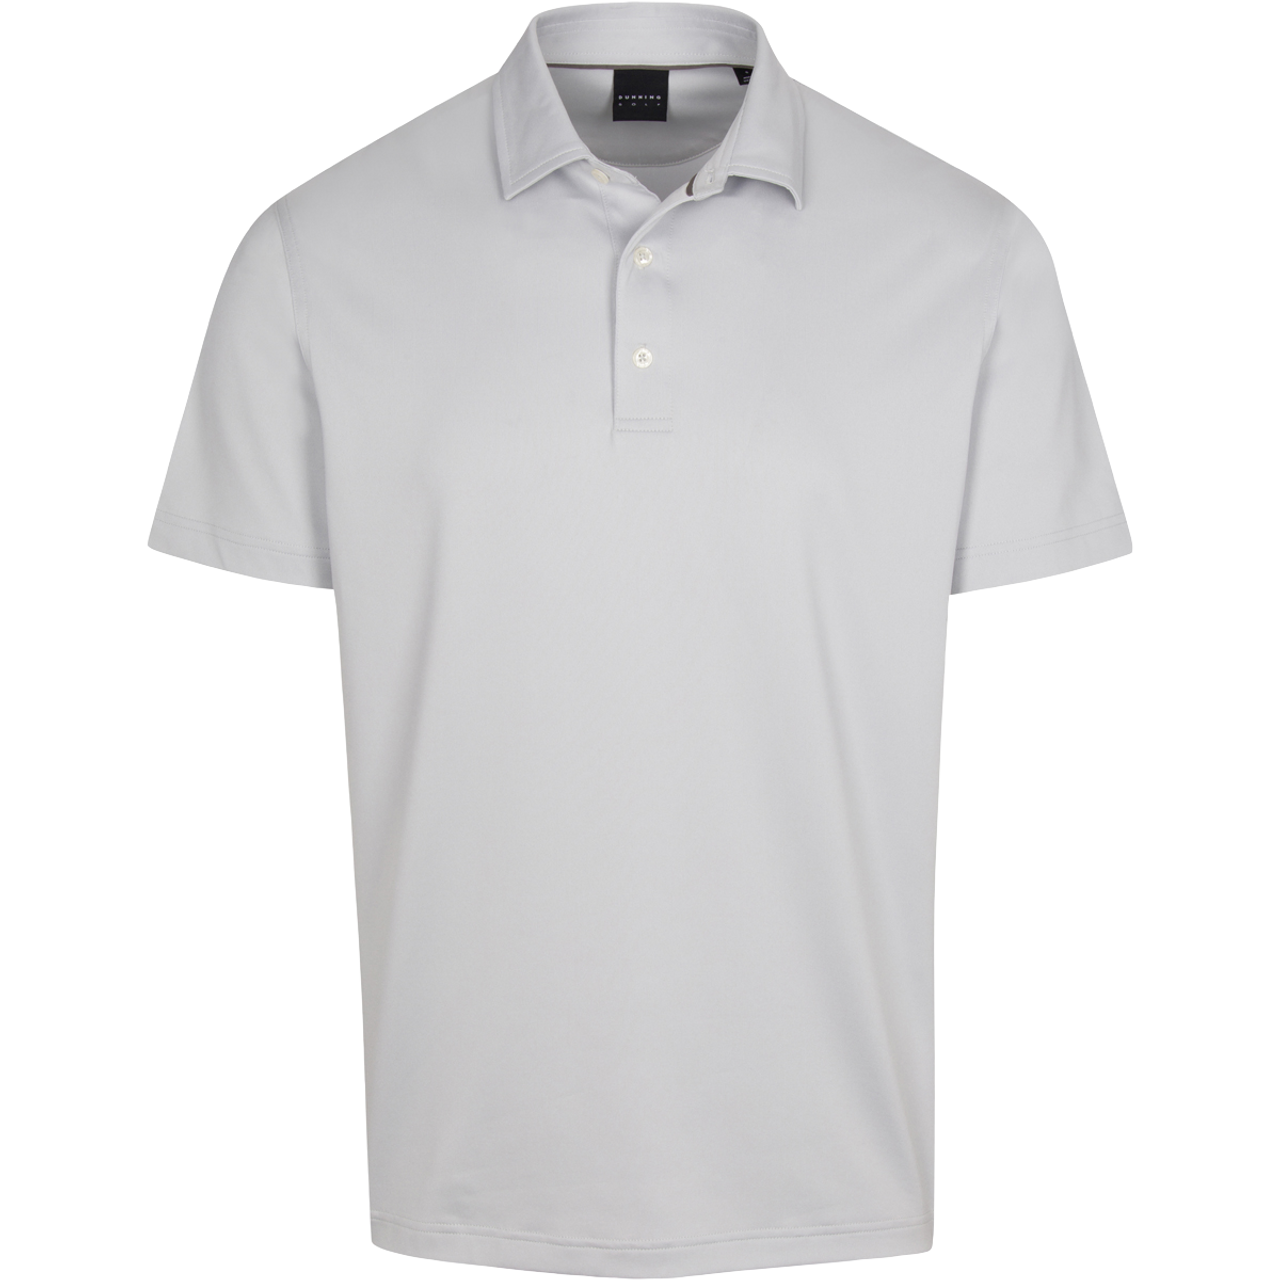 Player Jersey Performance Polo - Dunning